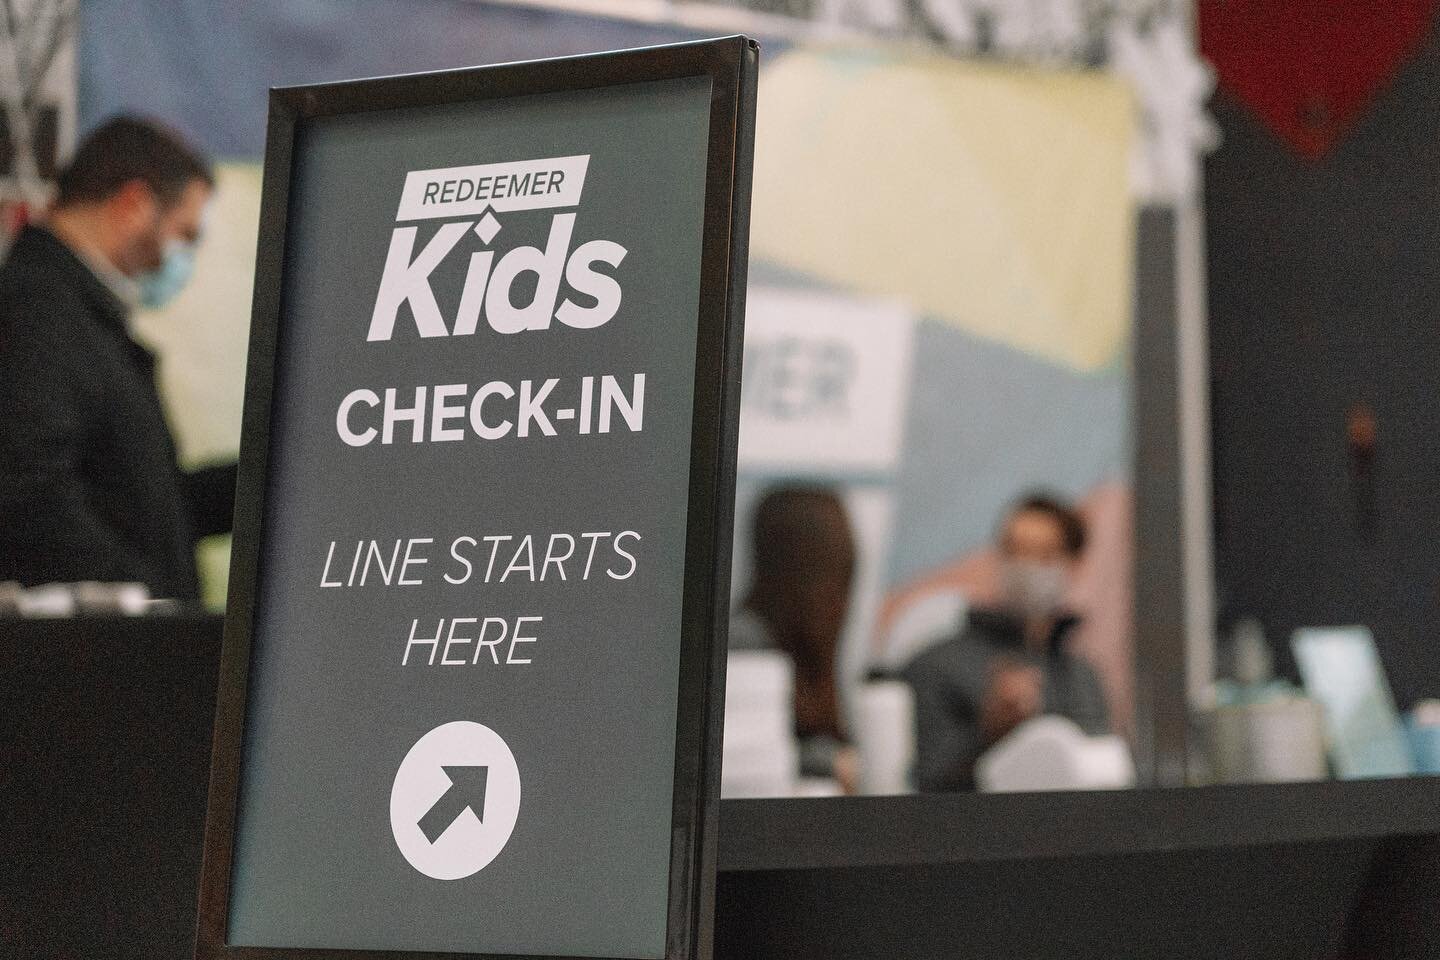 ATTENTION PARENTS: Our Redeemer Kids Team can&rsquo;t wait to celebrate Easter with your kiddos and we know that morning will be a busy one for everyone. To make things a little easier, we encourage you to check out our early check-in form at the lin